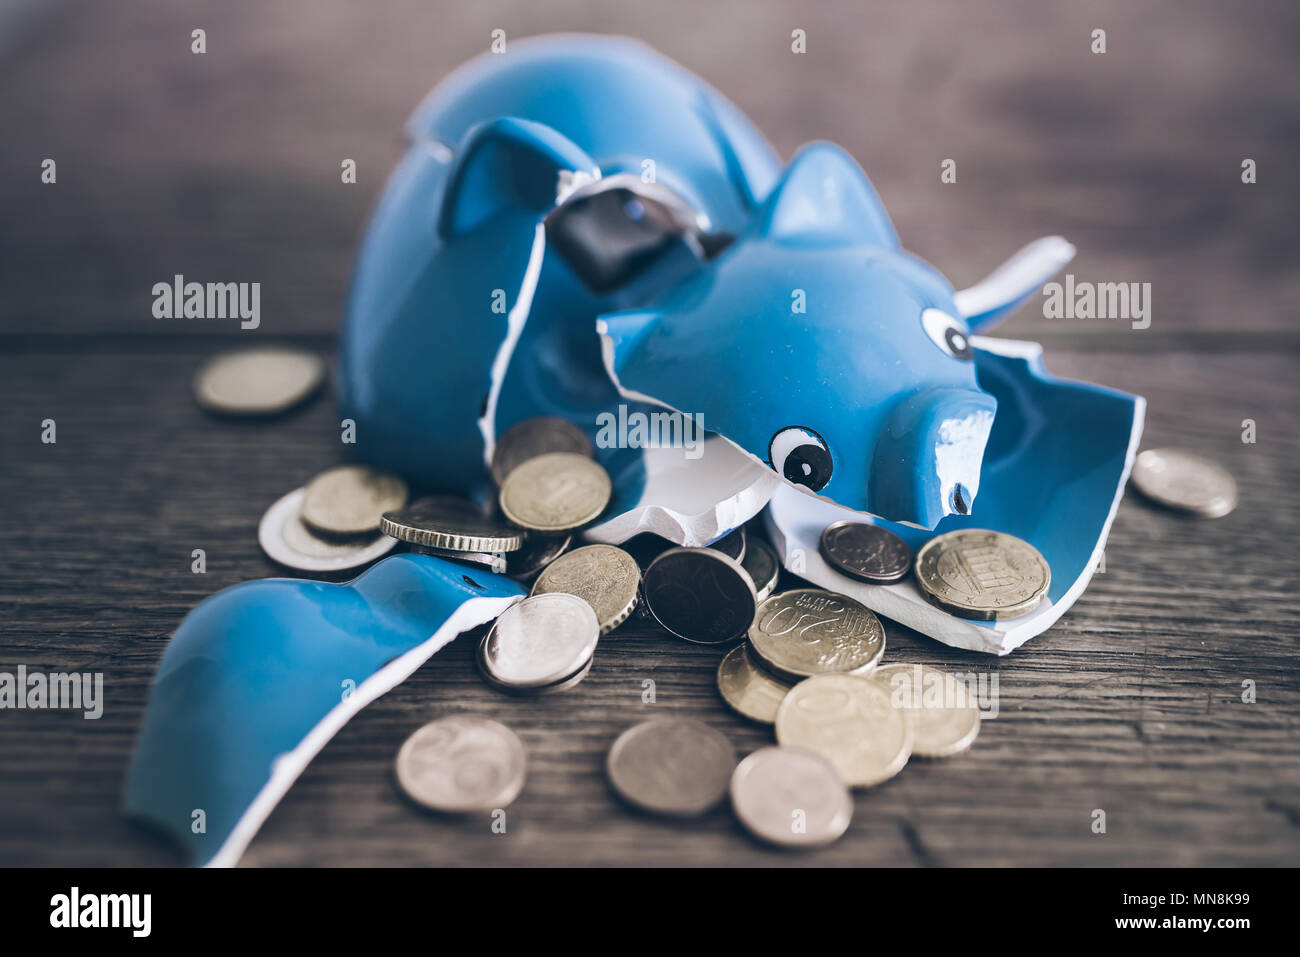 shattered broken piggy bank with coins on rustic wooden table Stock Photo